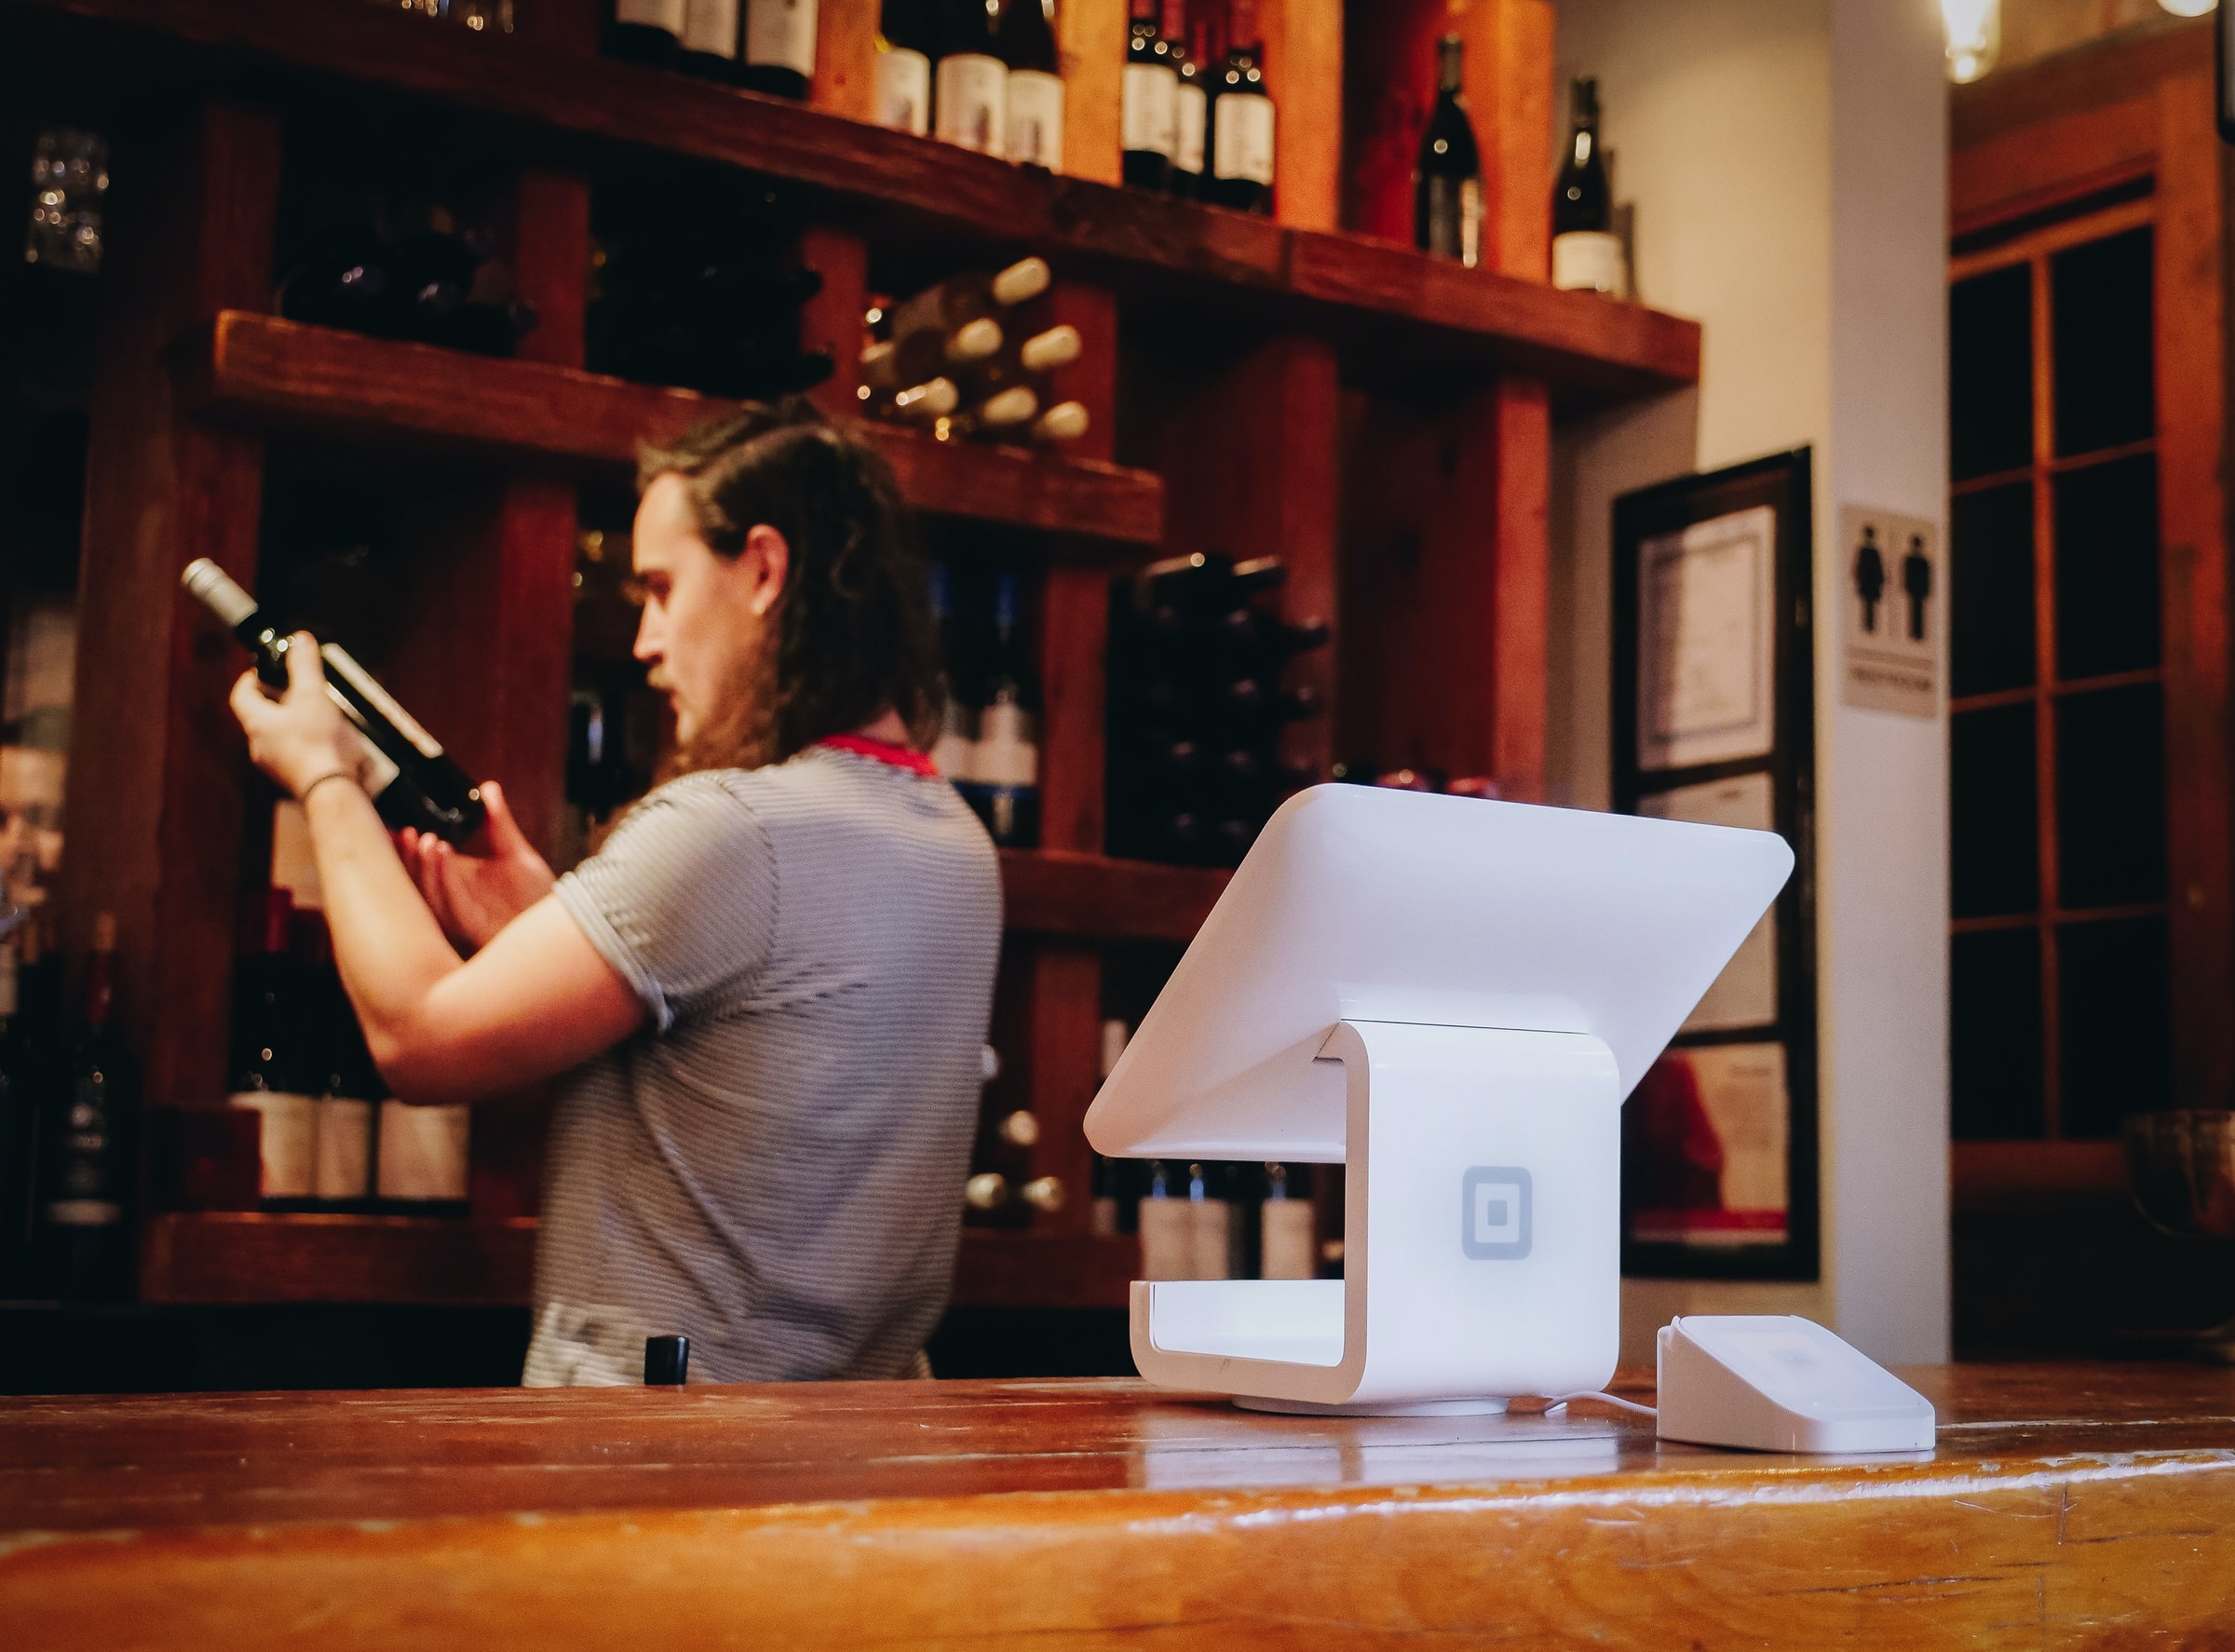 A bar back puts wine onto a shelf, show important it is to keep the bar stocked, a key factor when hiring a bartender